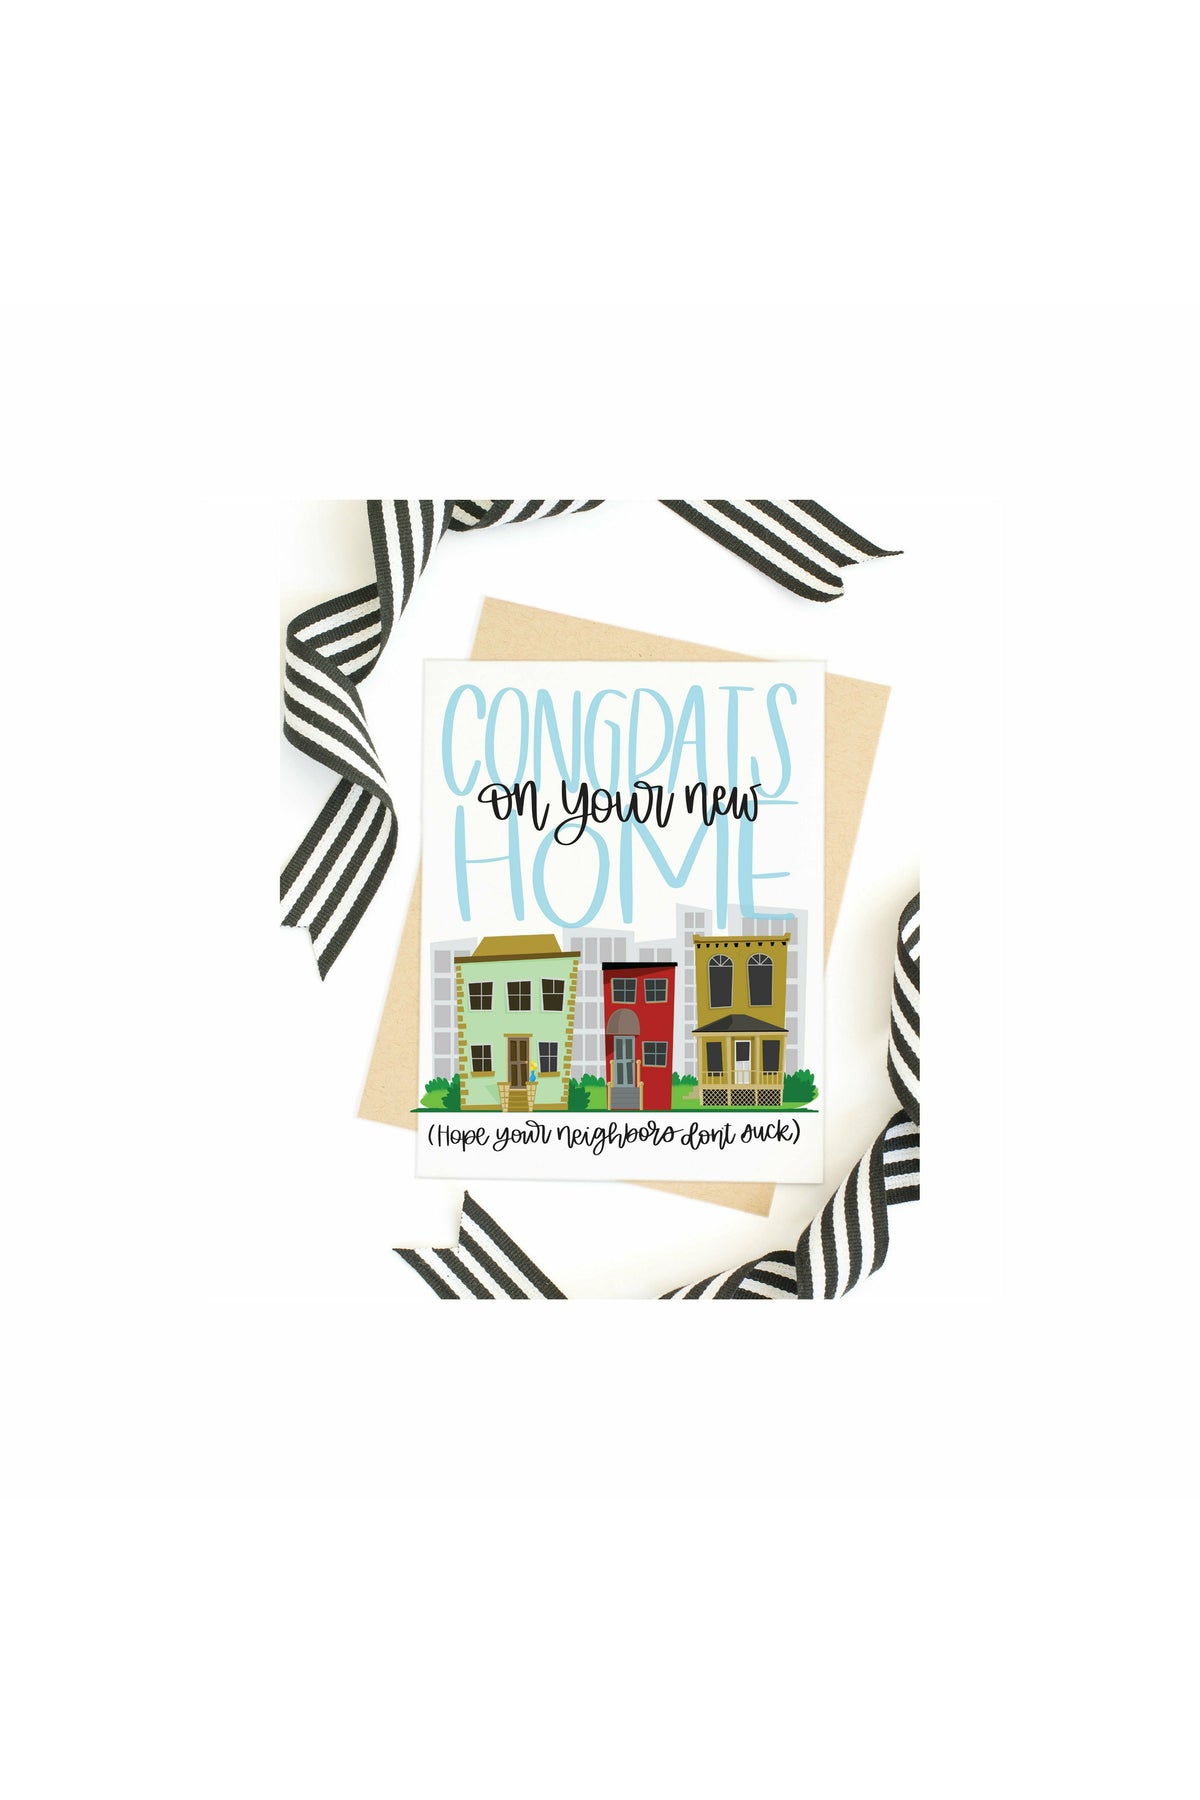 Home Sweet Home (Hope Your Neighbors Don't Suck) Card-Cards-Wild & Precious